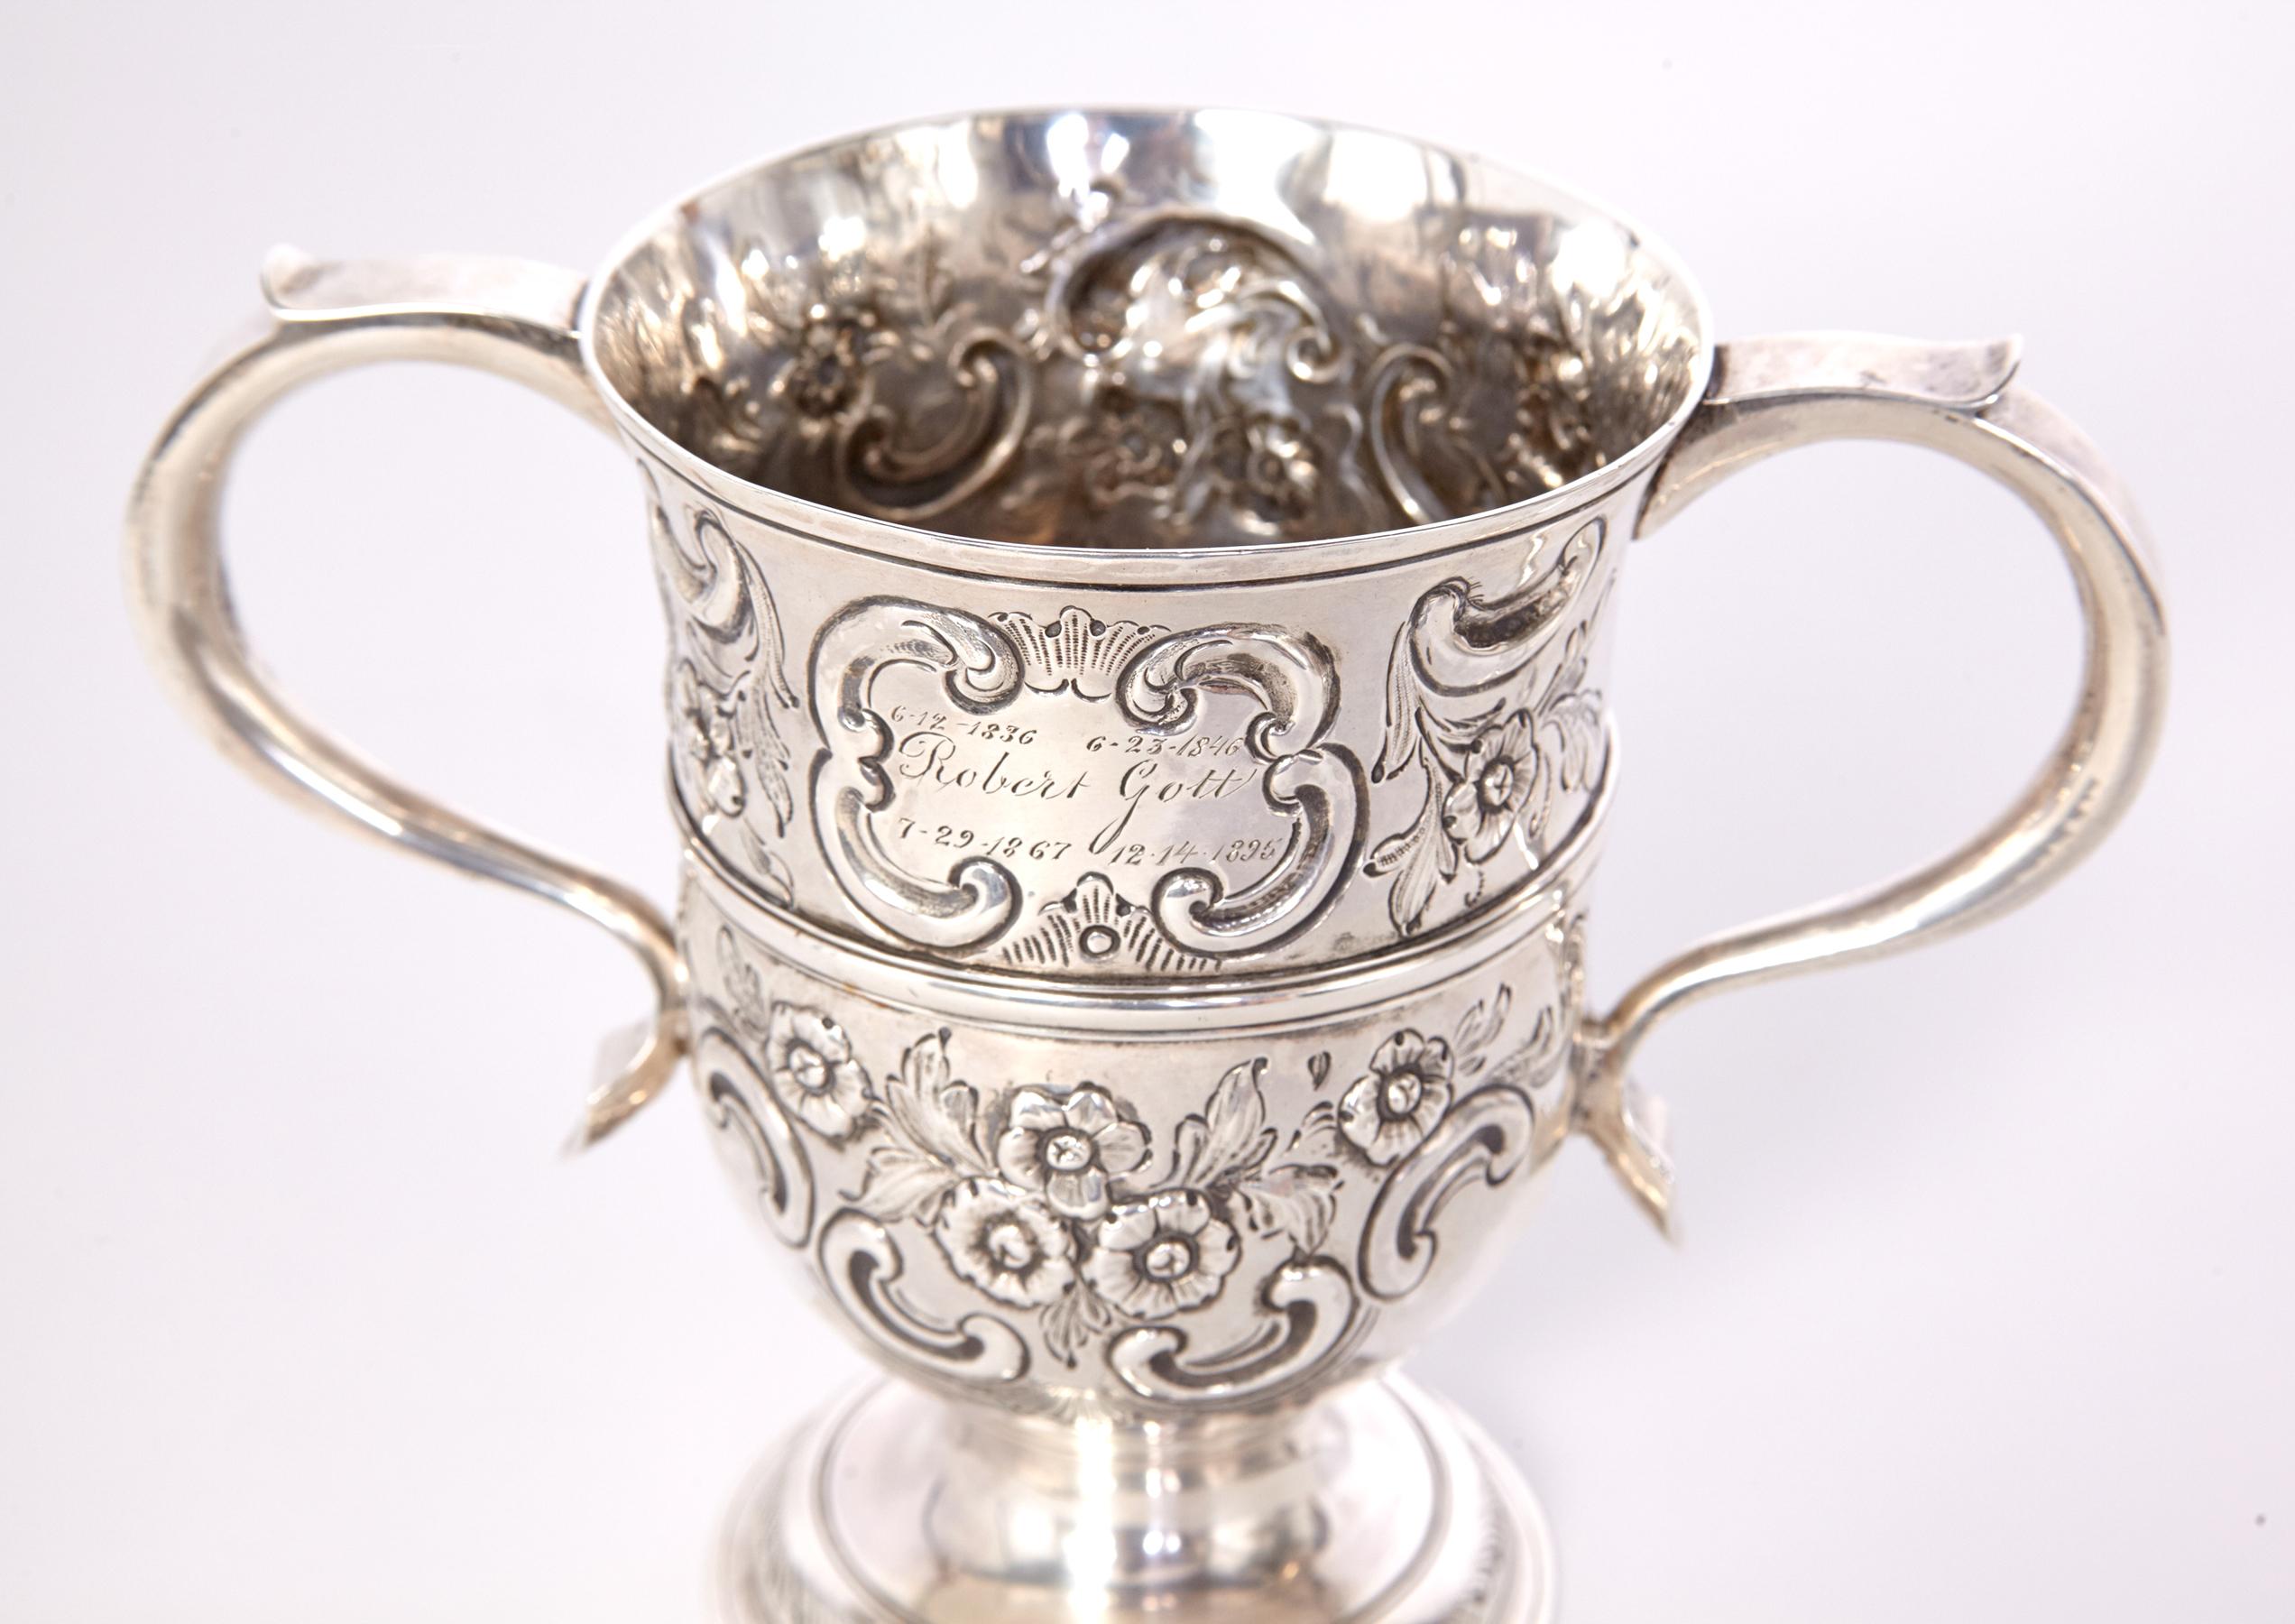 Metalwork Sterling Silver 2-Handled Loving Cup 1762, London by Thomas Whipham